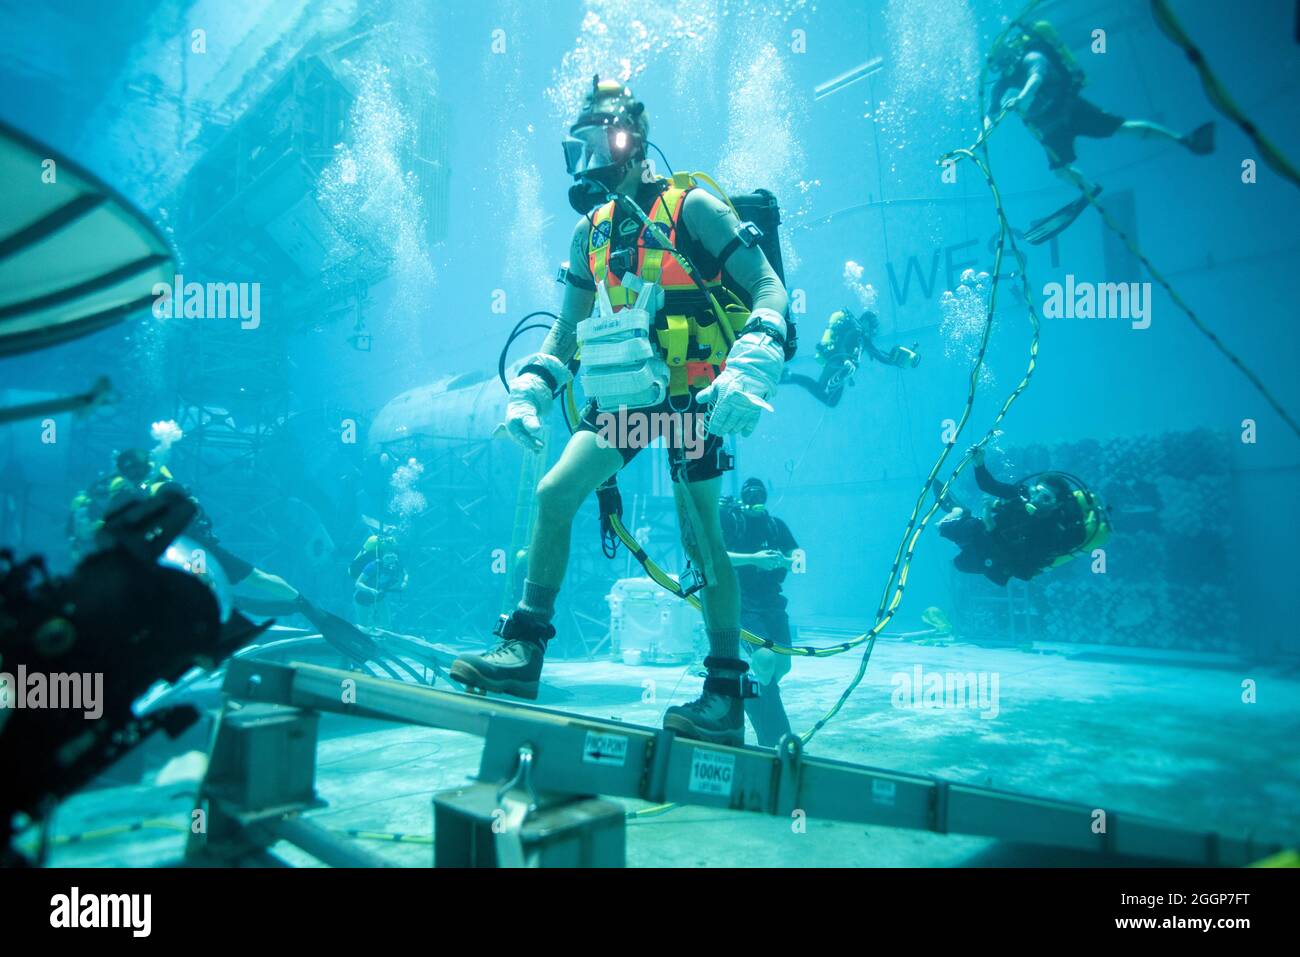 NASA astronauts train underwater in the Neutral Buoyancy Lab at the Johnson Space Center in Houston, Texas, September, 2019. Stock Photo